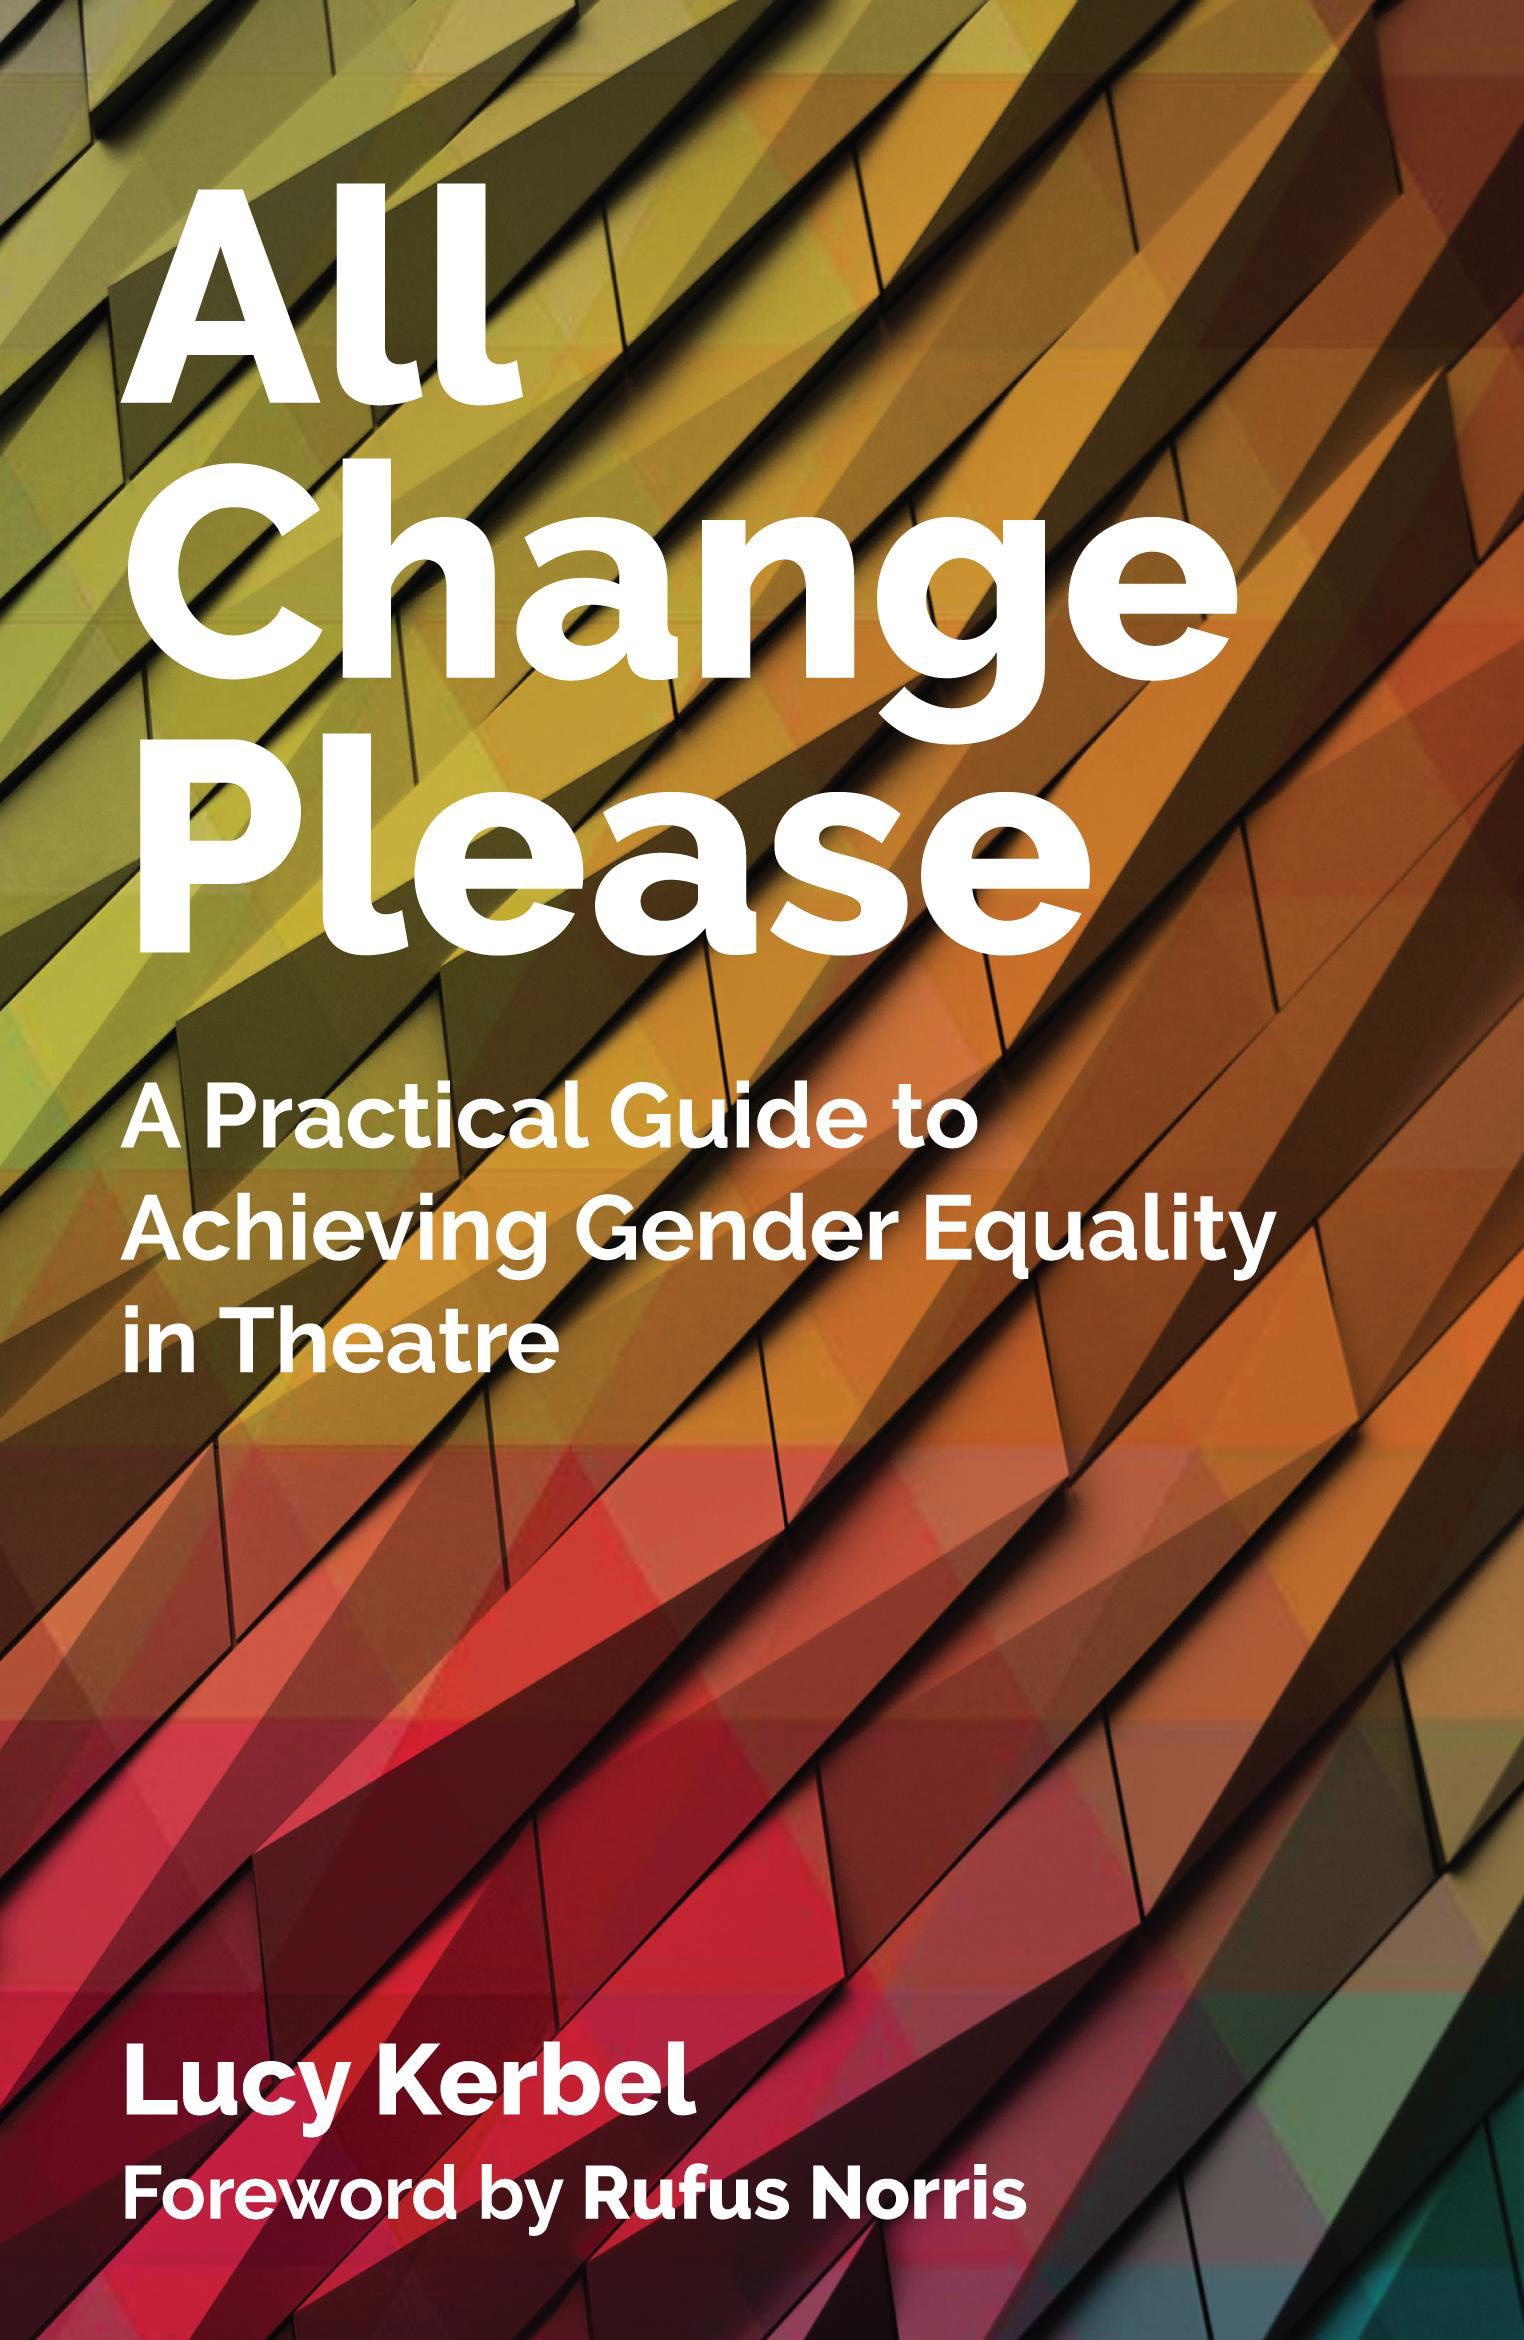 Book Review: ALL CHANGE PLEASE: A PRACTICAL GUIDE TO ACHIEVING GENDER EQUALITY IN THEATRE